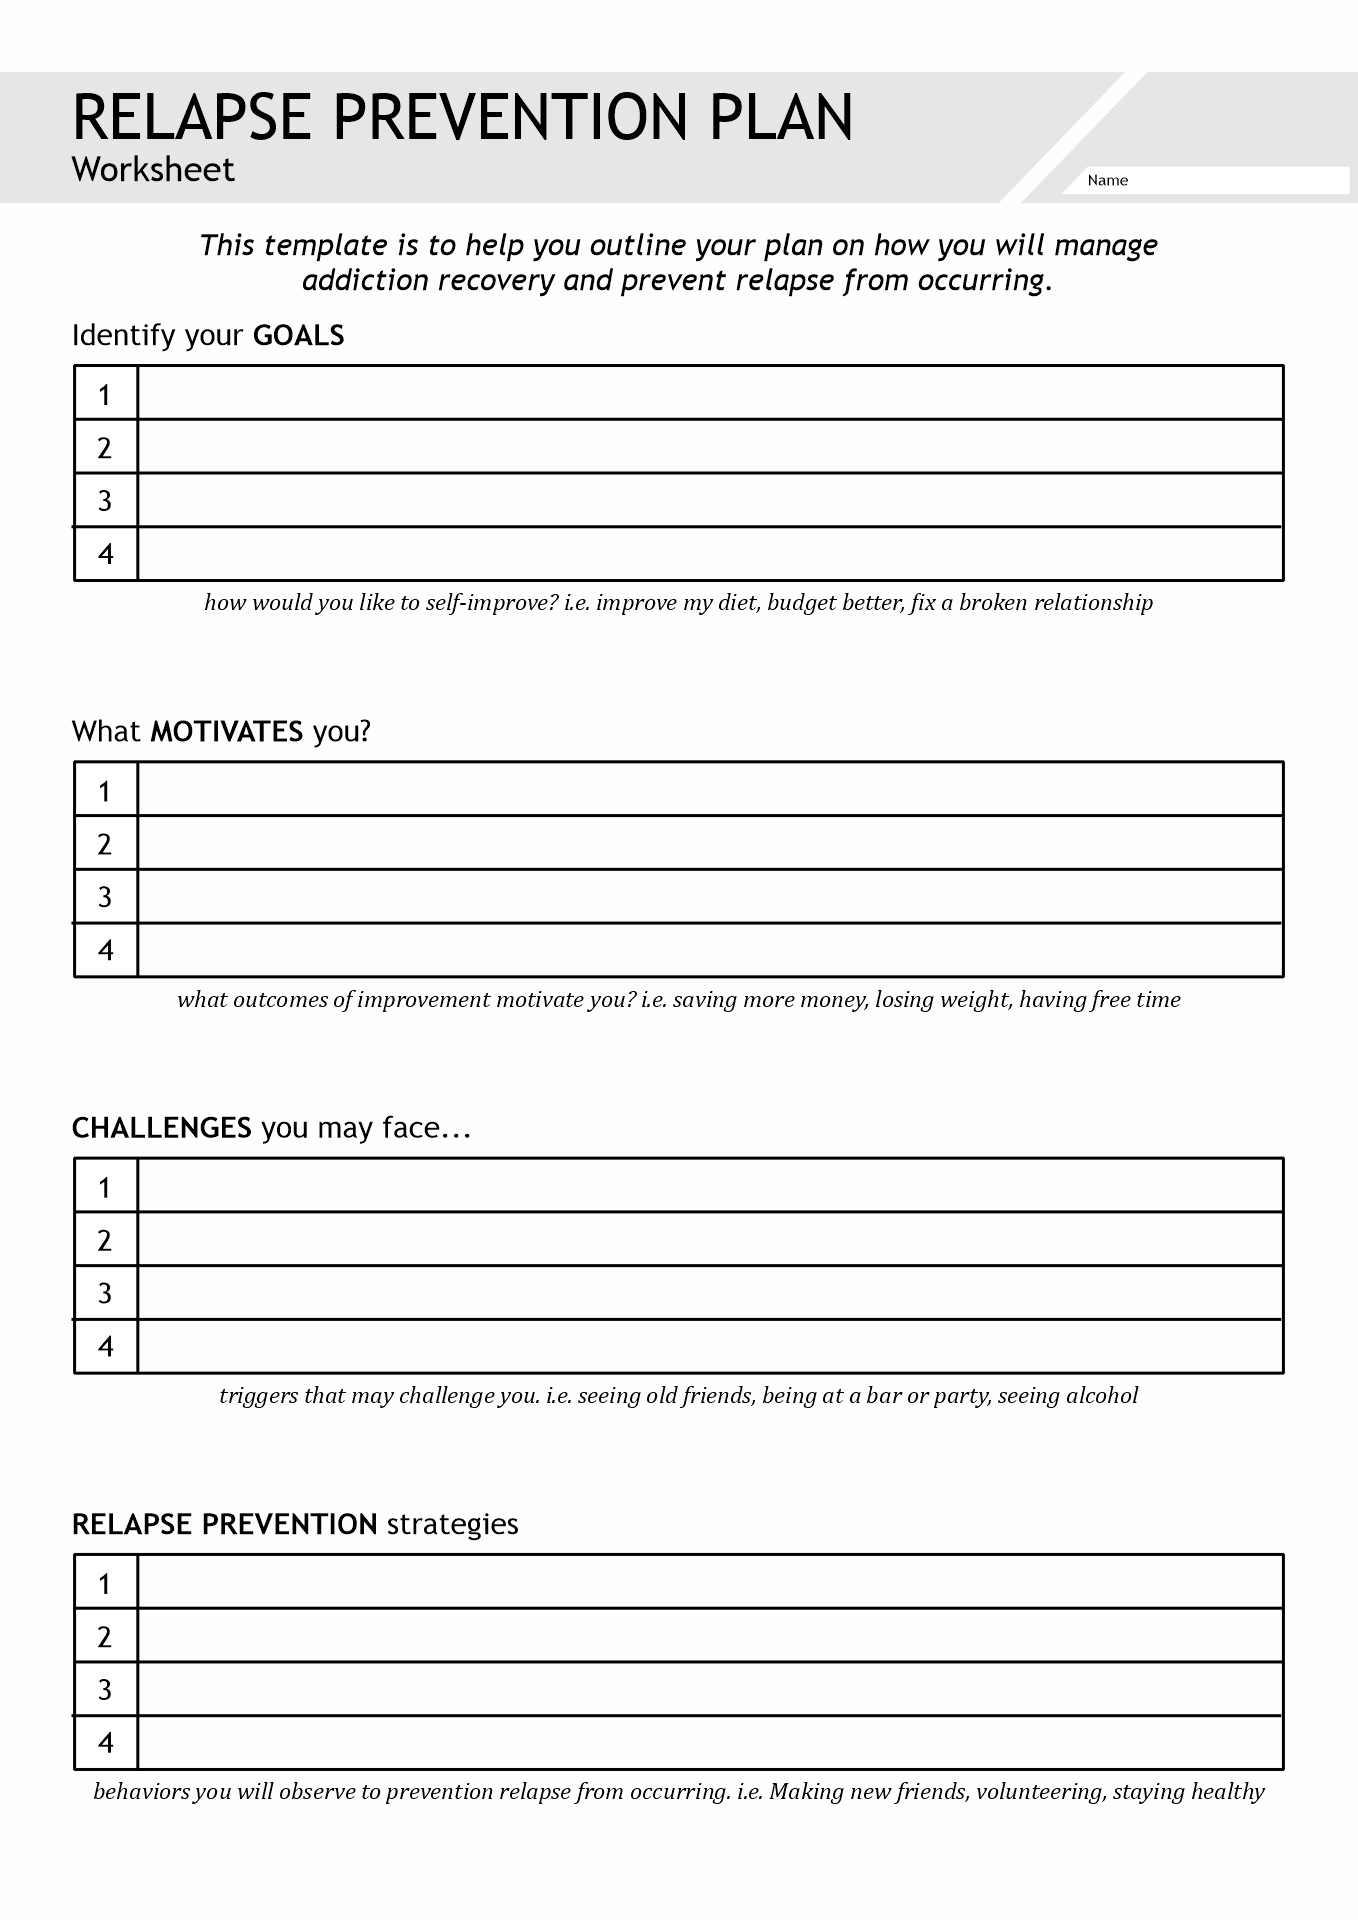 printable-addiction-recovery-worksheets-customize-and-print